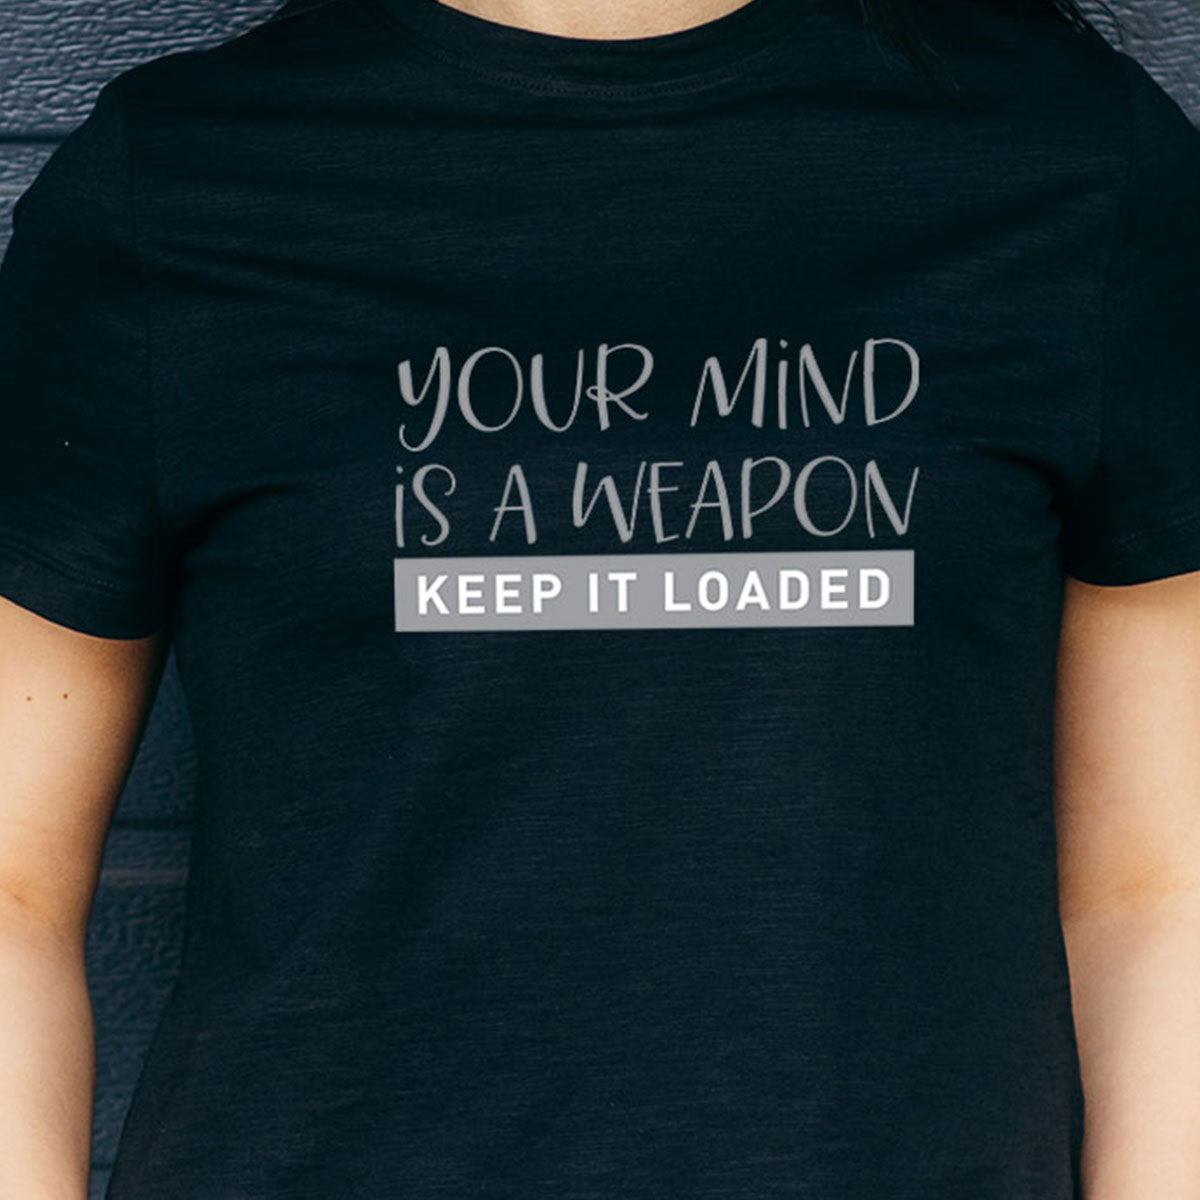 Your Mind Is A Weapon - Printed Cotton T- Shirt - Black